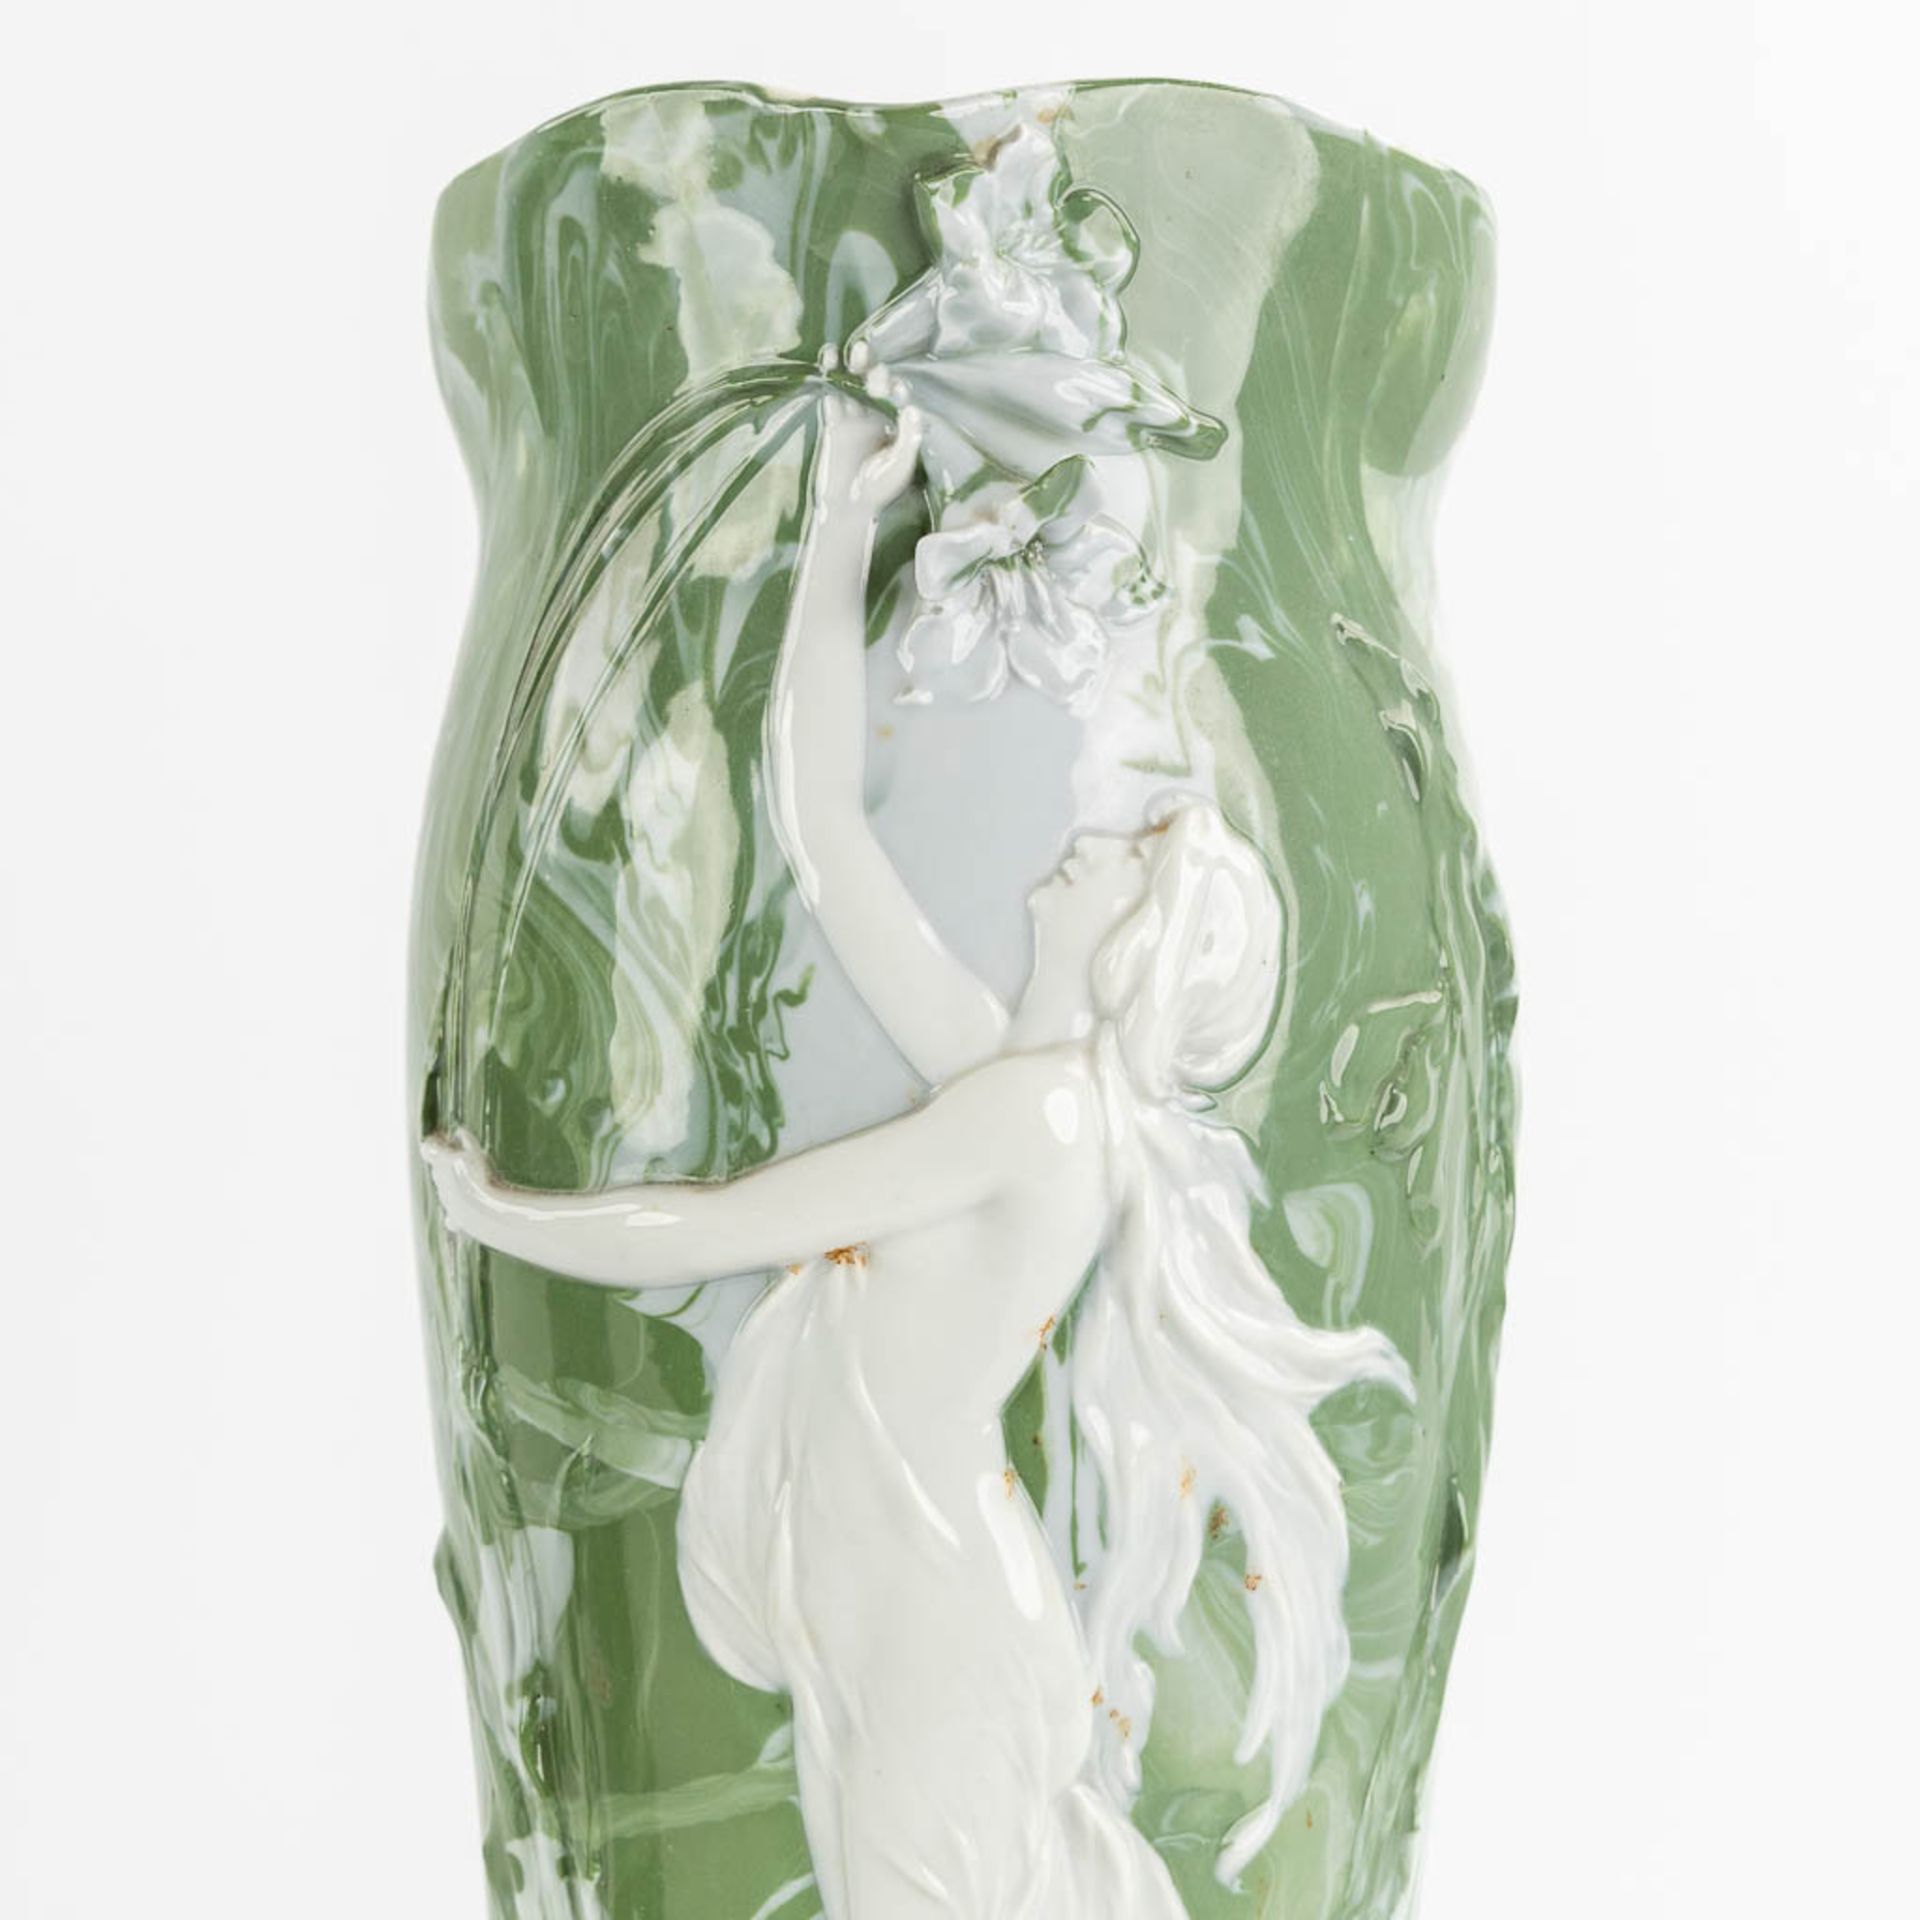 Attributed to Adolf OPPEL (1840-1923) 'Vases with Ladies' Art Nouveau. (L:13 x W:15 x H:36 cm) - Image 13 of 13